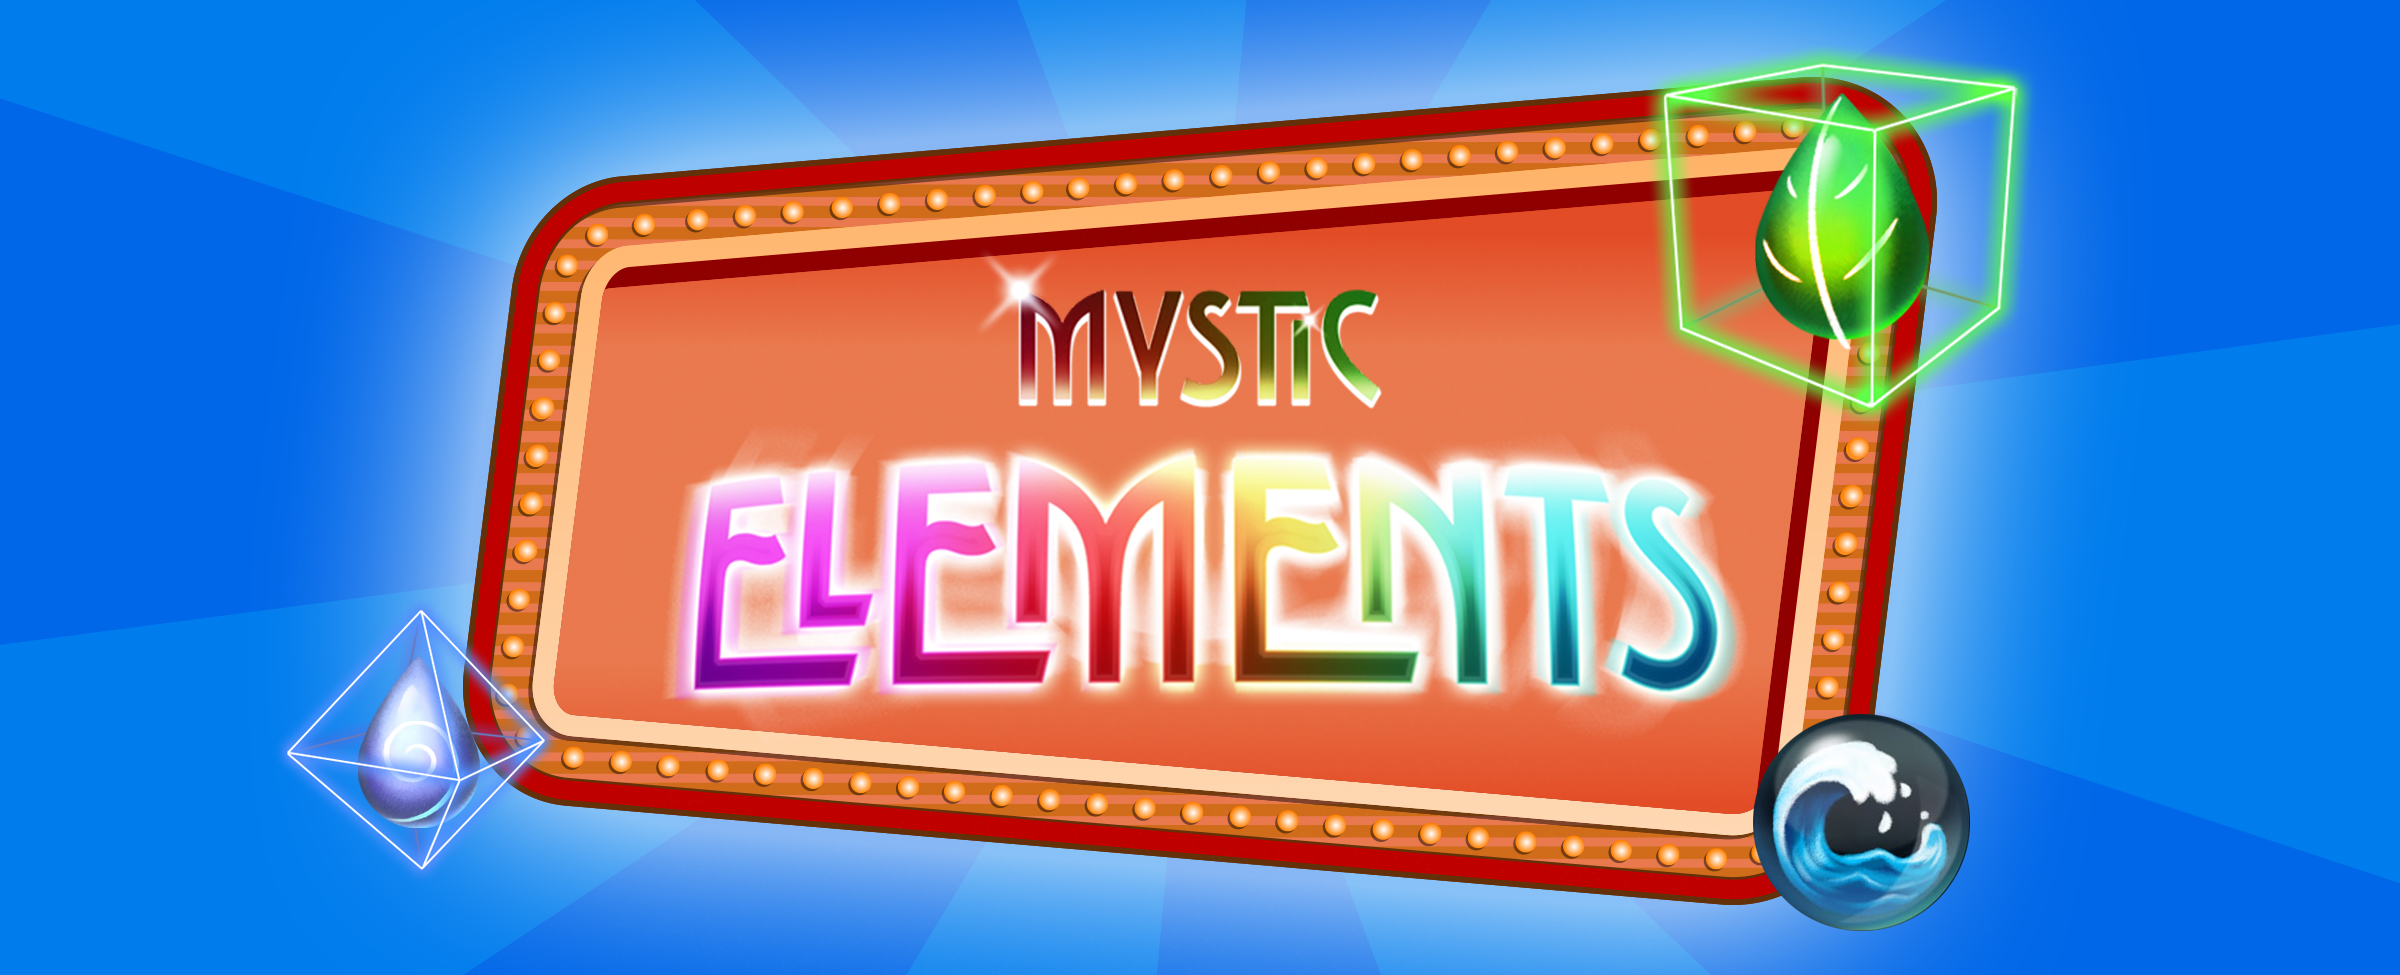 Hovering in the middle of a dual-toned blue background, is an illustrated orange and red Vegas-style sign with a border surrounded by lit-up bulbs. In the sign is the logo from the Cafe Casino slots game, Mystic Elements. Dotted around the sign are three game symbols including a blue wind, a green leaf, and a blue circular globe filled with an ocean wave.